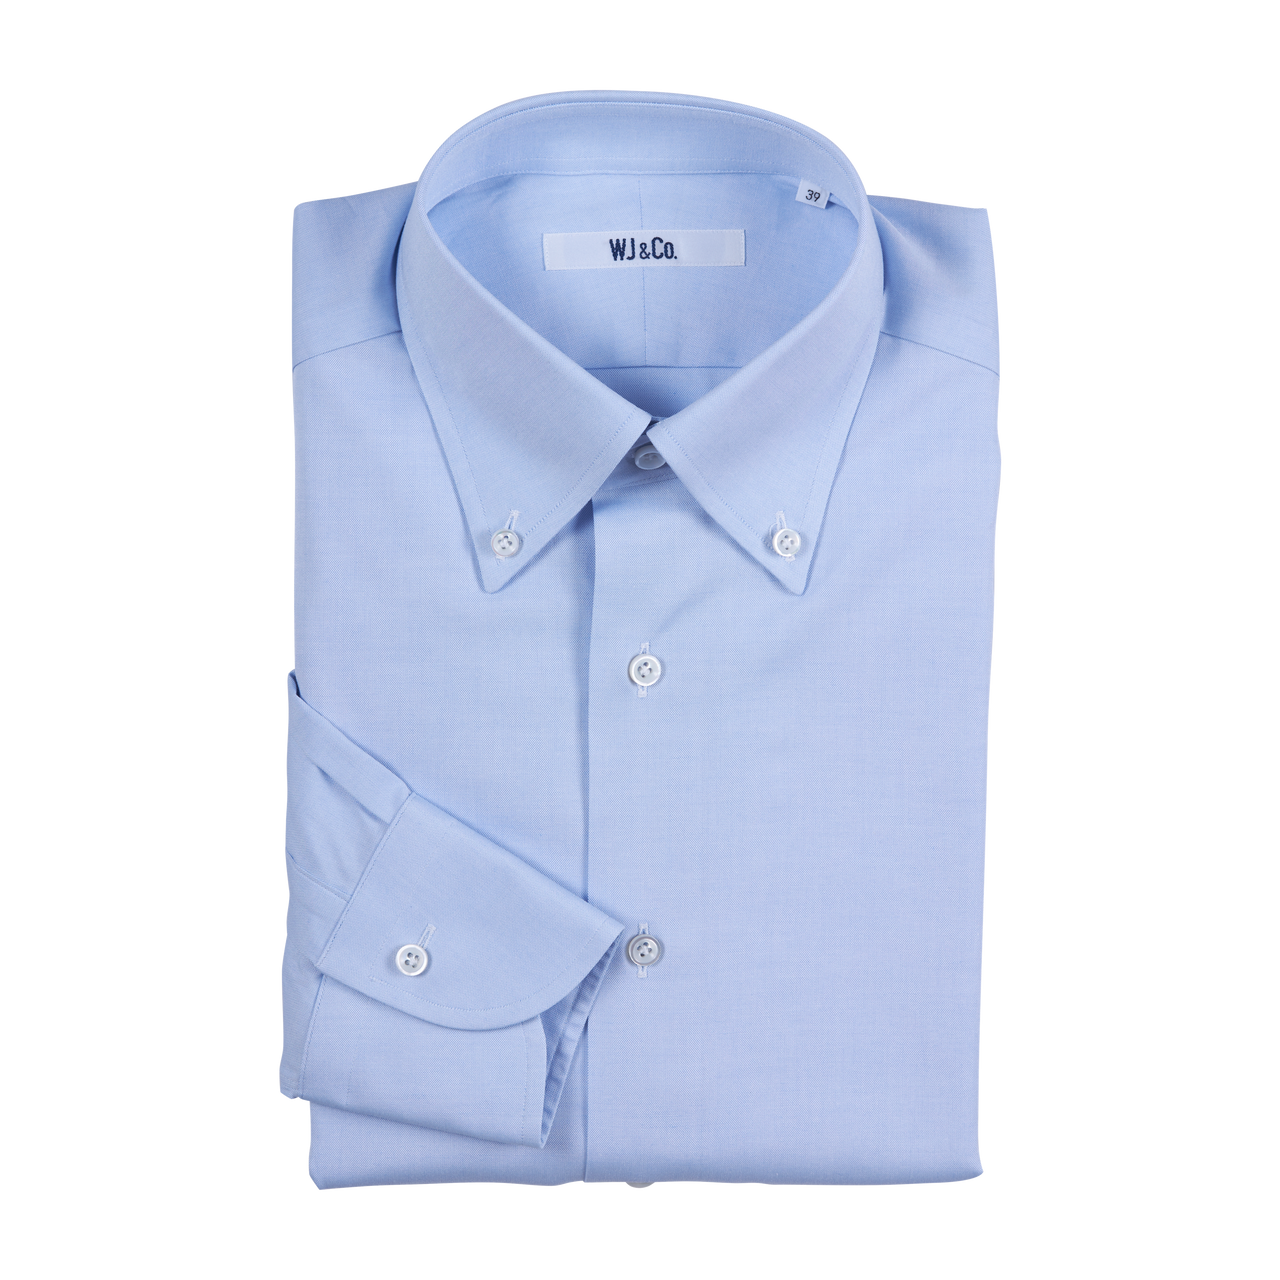 WJ & Co. Shirt in Blue Pinpoint Oxford with Button Down Collar